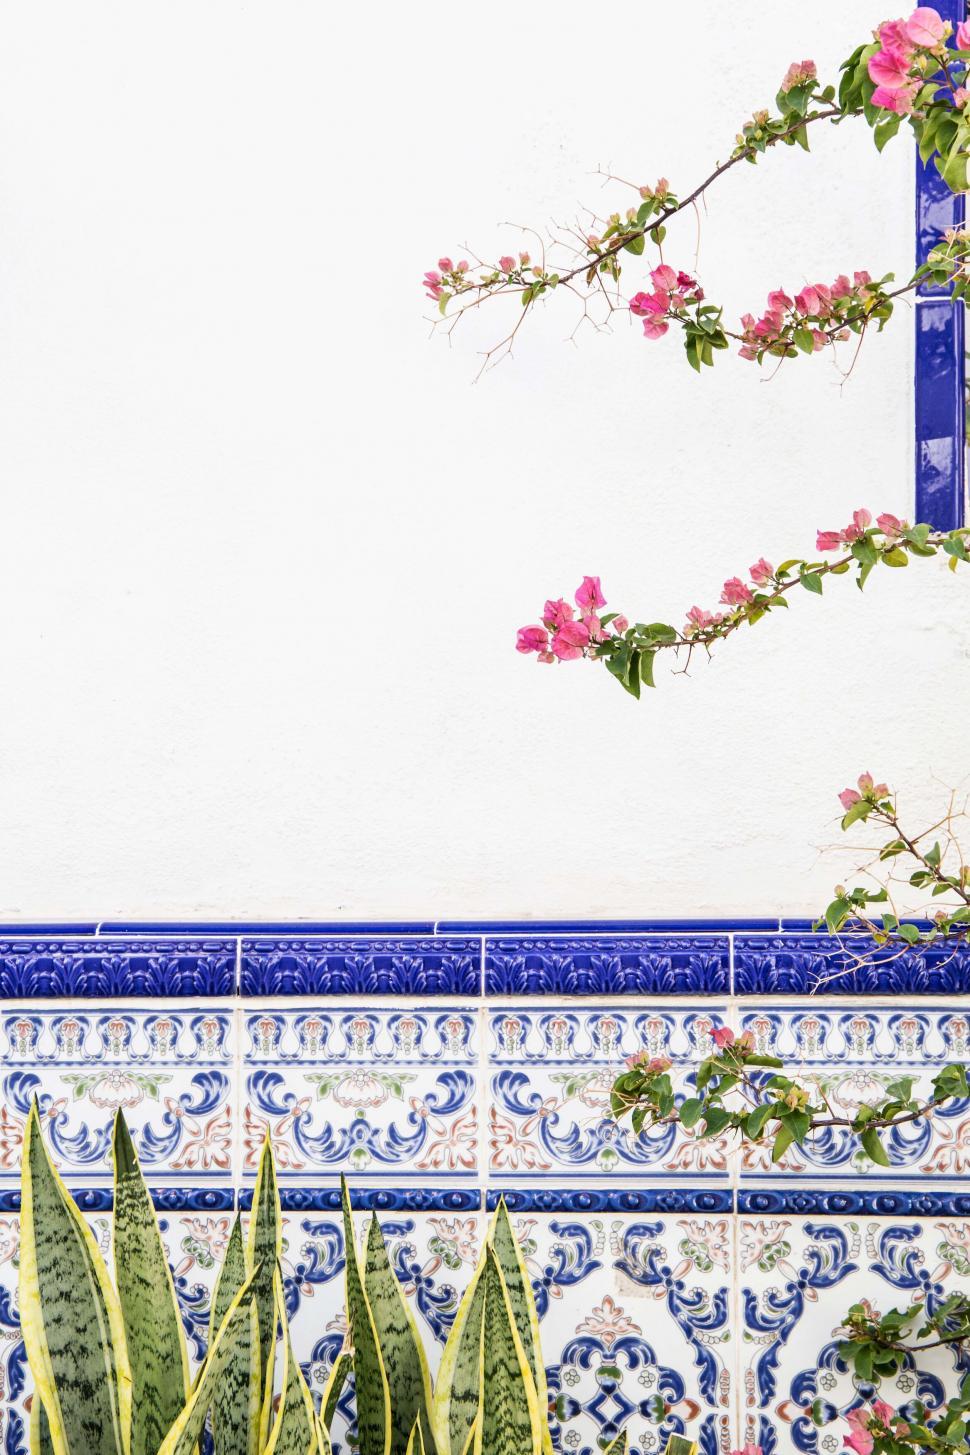 Free Image of Blooming flowers on Portuguese tiles 